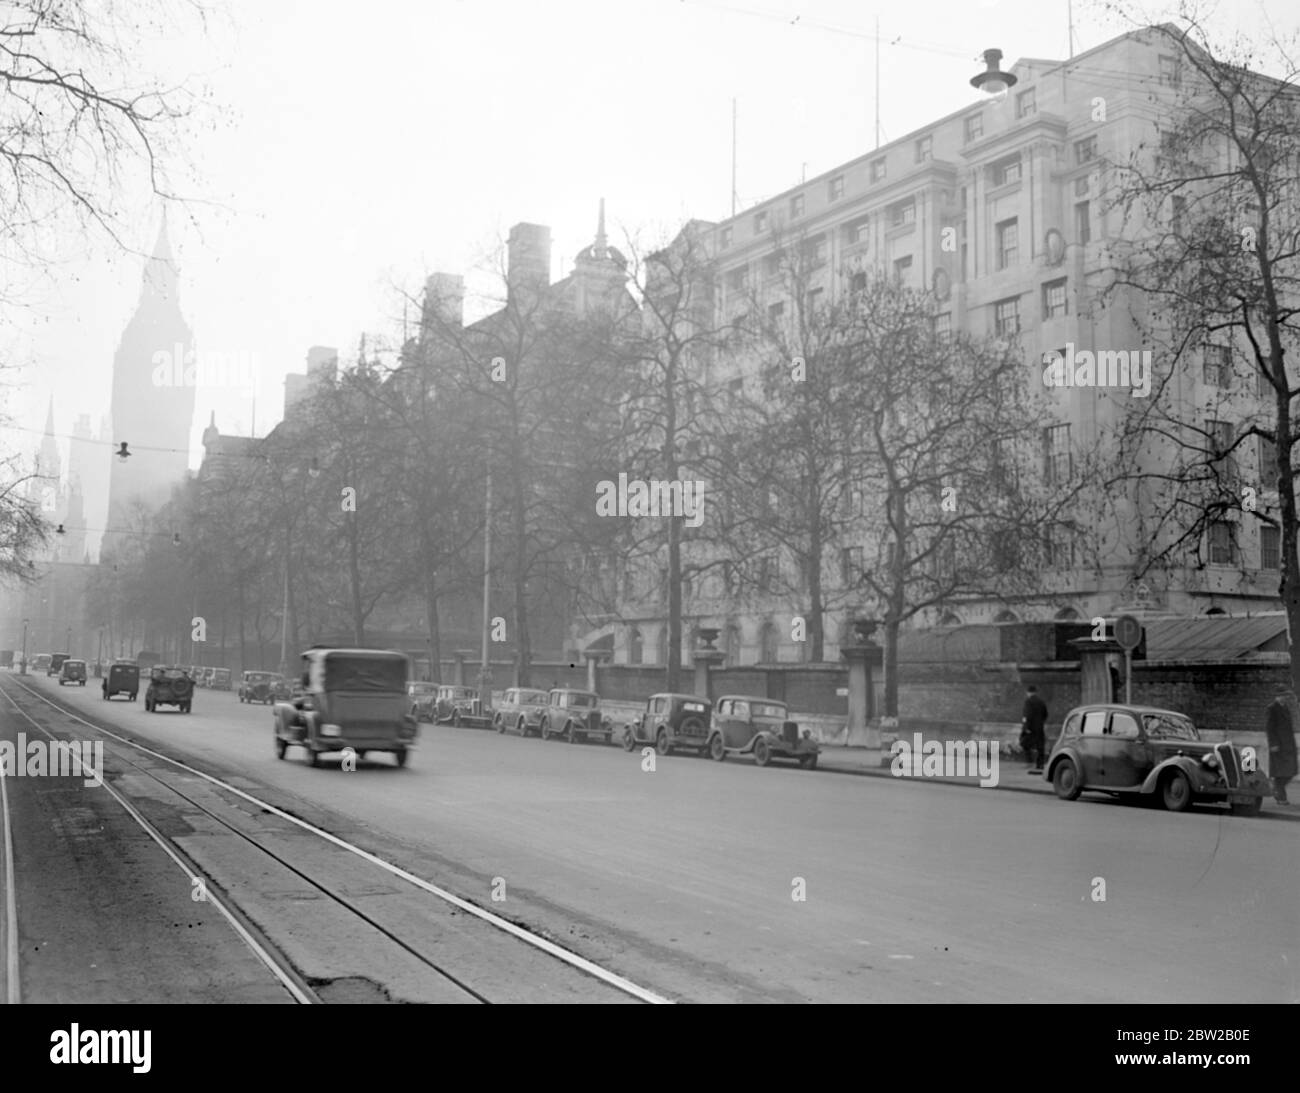 Victoria Embankment, the Ministry of Defence building with the Norman Shaw Buildings, Parliament and Big Ben tower in the background. [No original caption, date] 1930s, 1940s Stock Photo